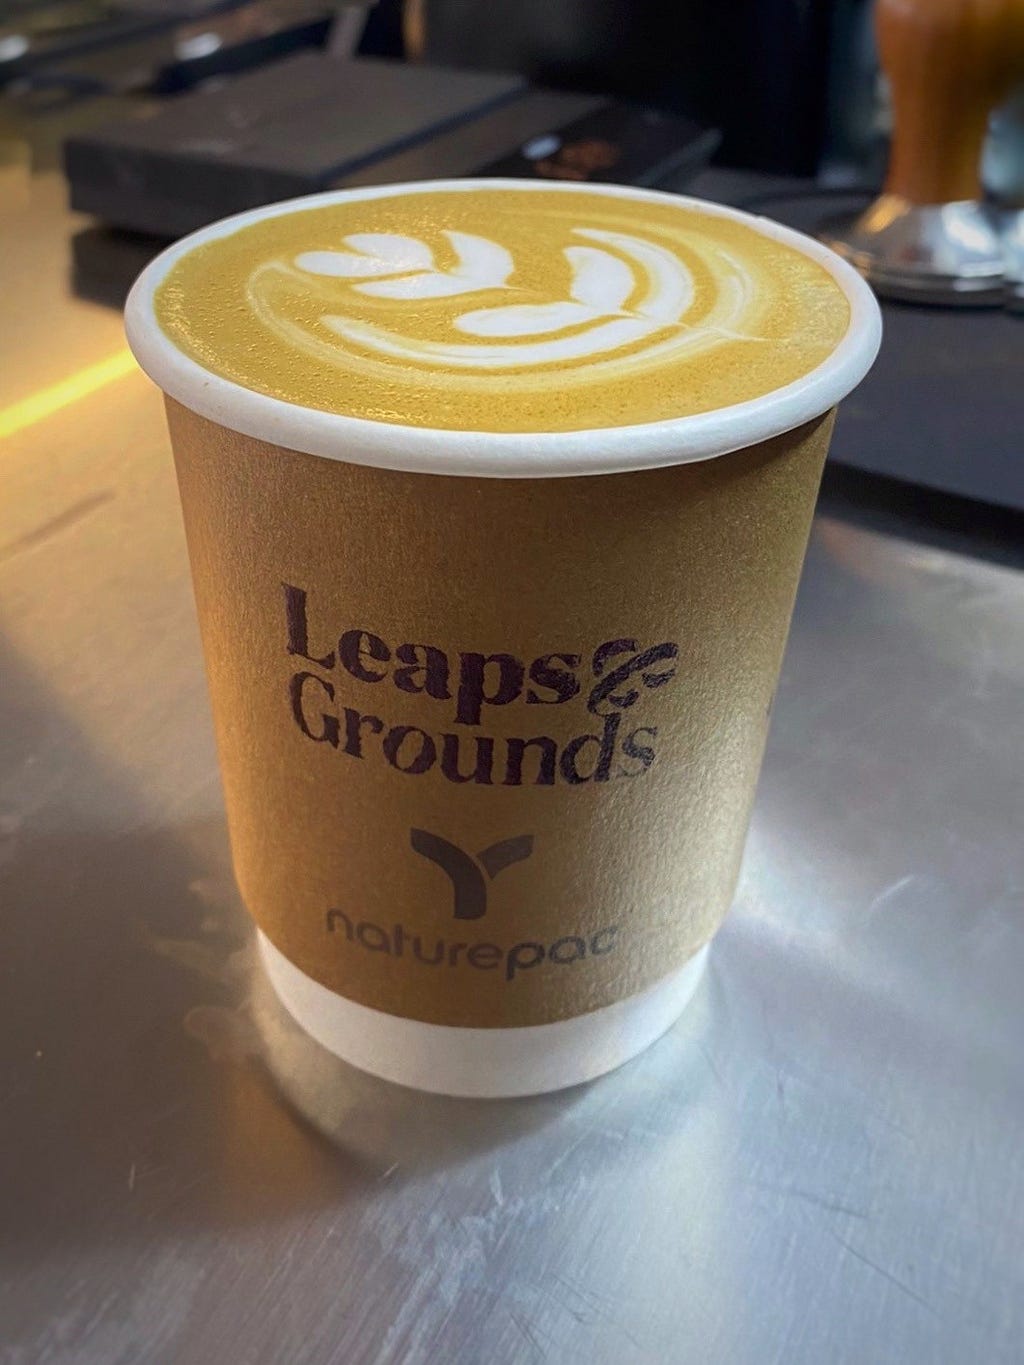 A cup of coffee from Leaps and Grounds